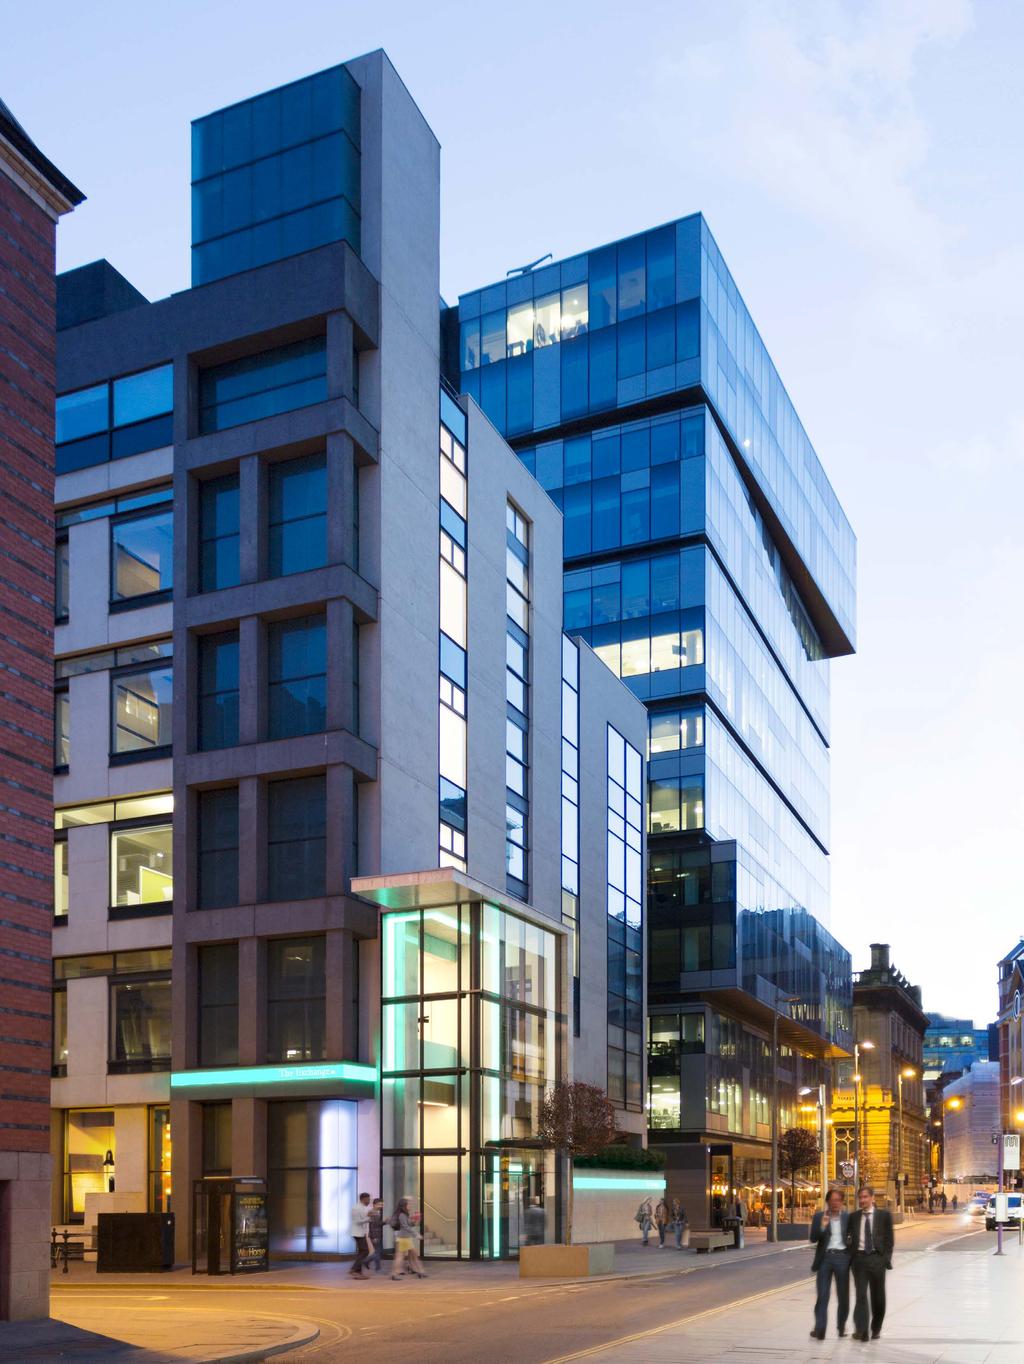 THE EXCHANGE WHAT S ON OFFER The Exchange has been recently refurbished to a high standard, offering flexible open plan office suites from single to multiple floors.